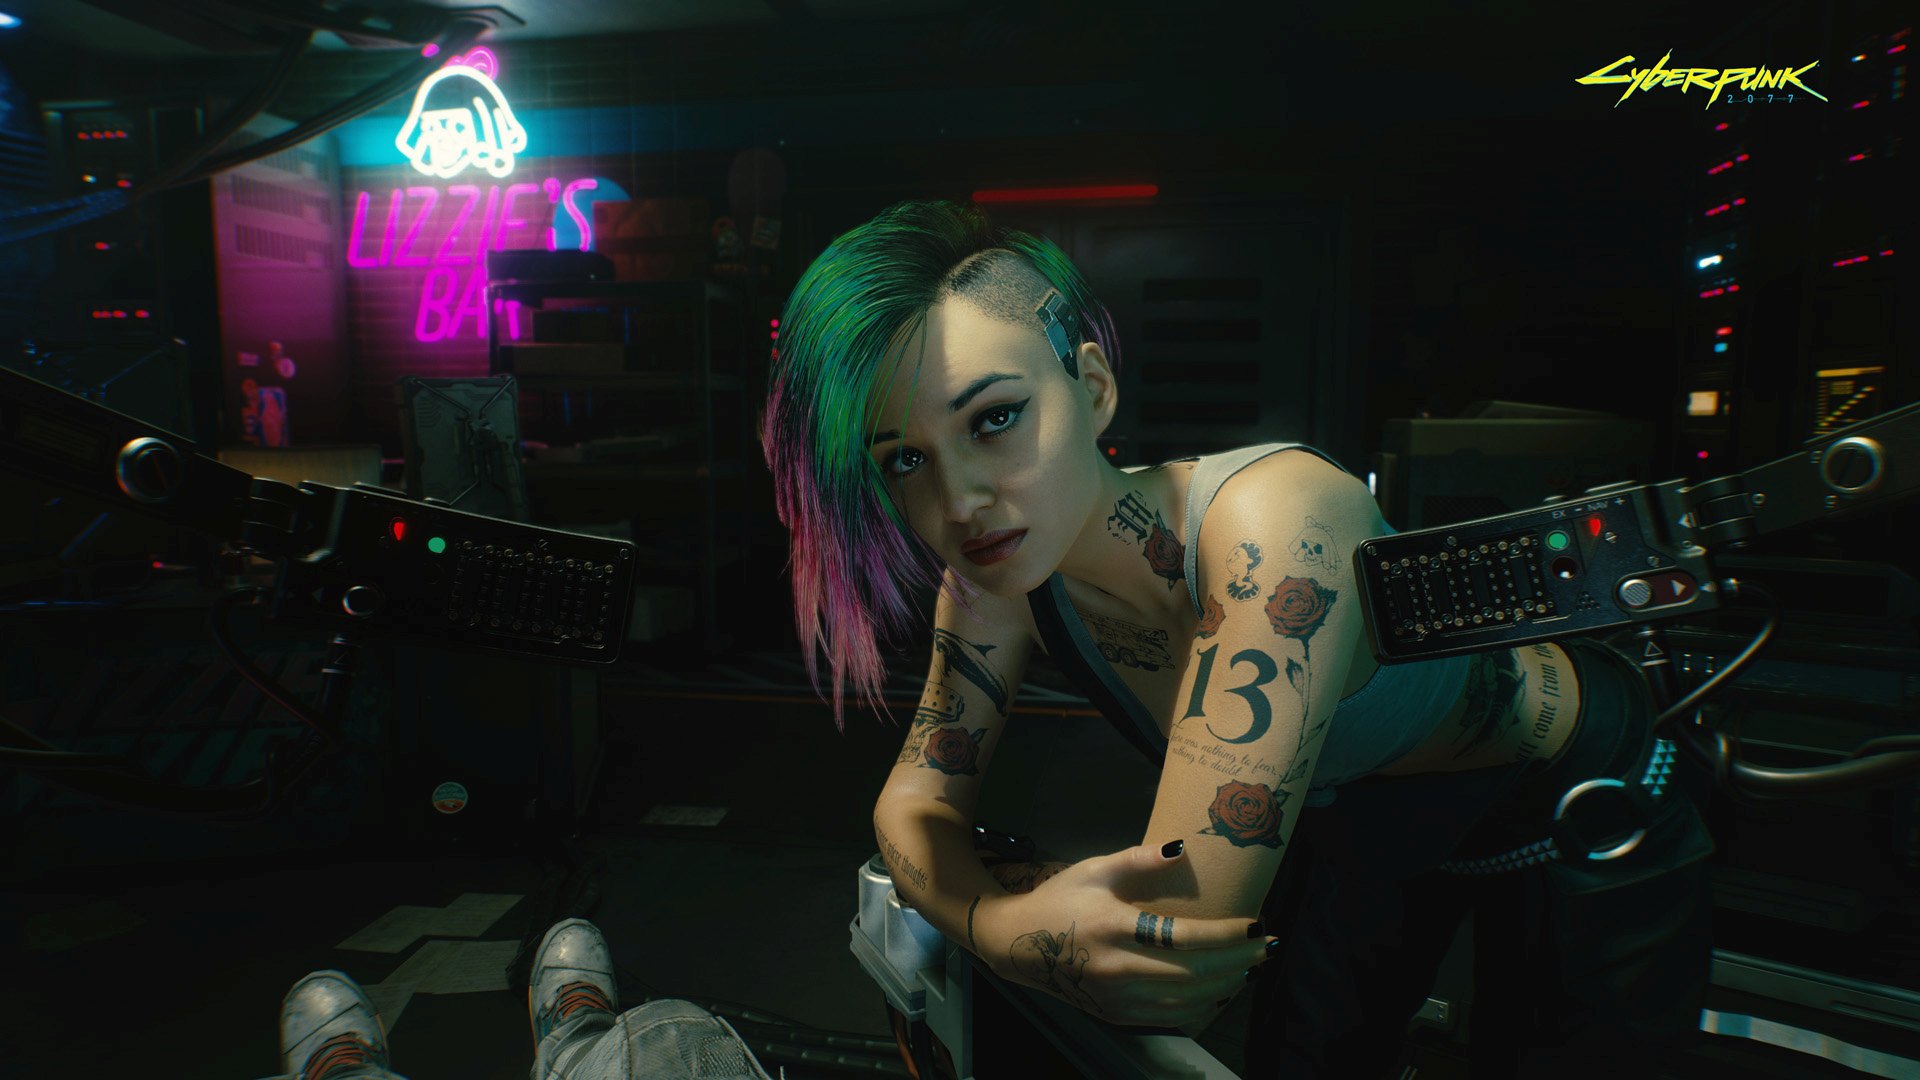 Cyberpunk 2077 Next-Gen Update Now Available for Xbox Series X